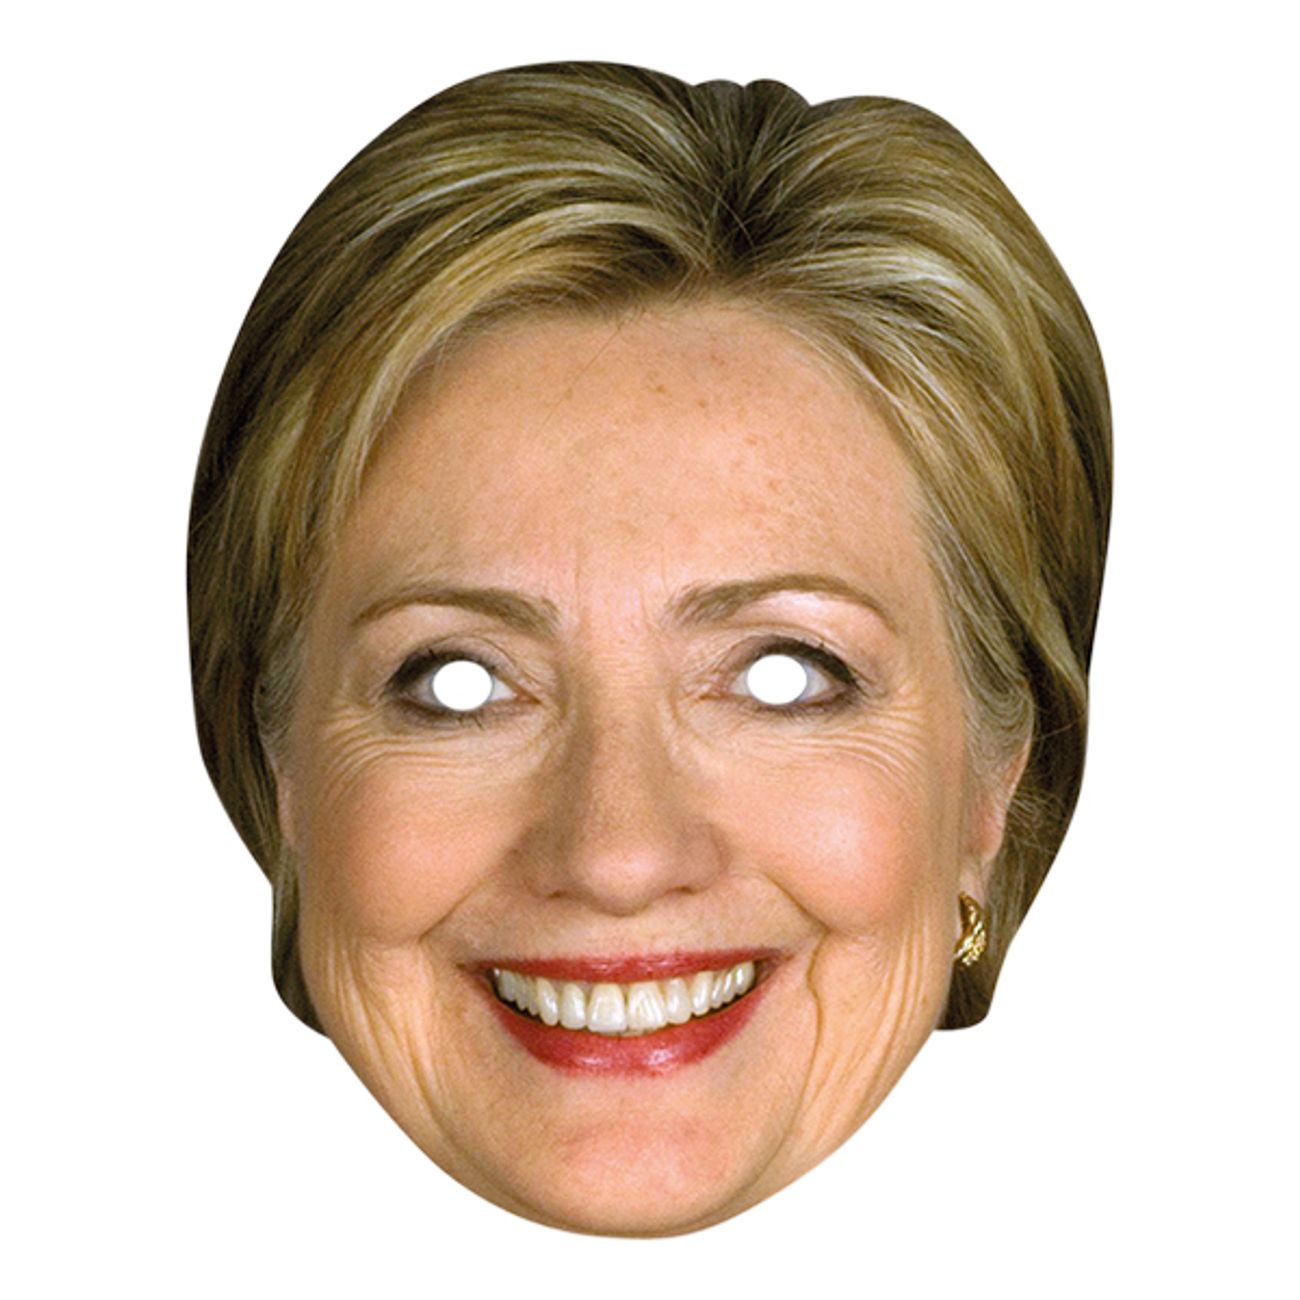 hilary-clinton-pappmask-2